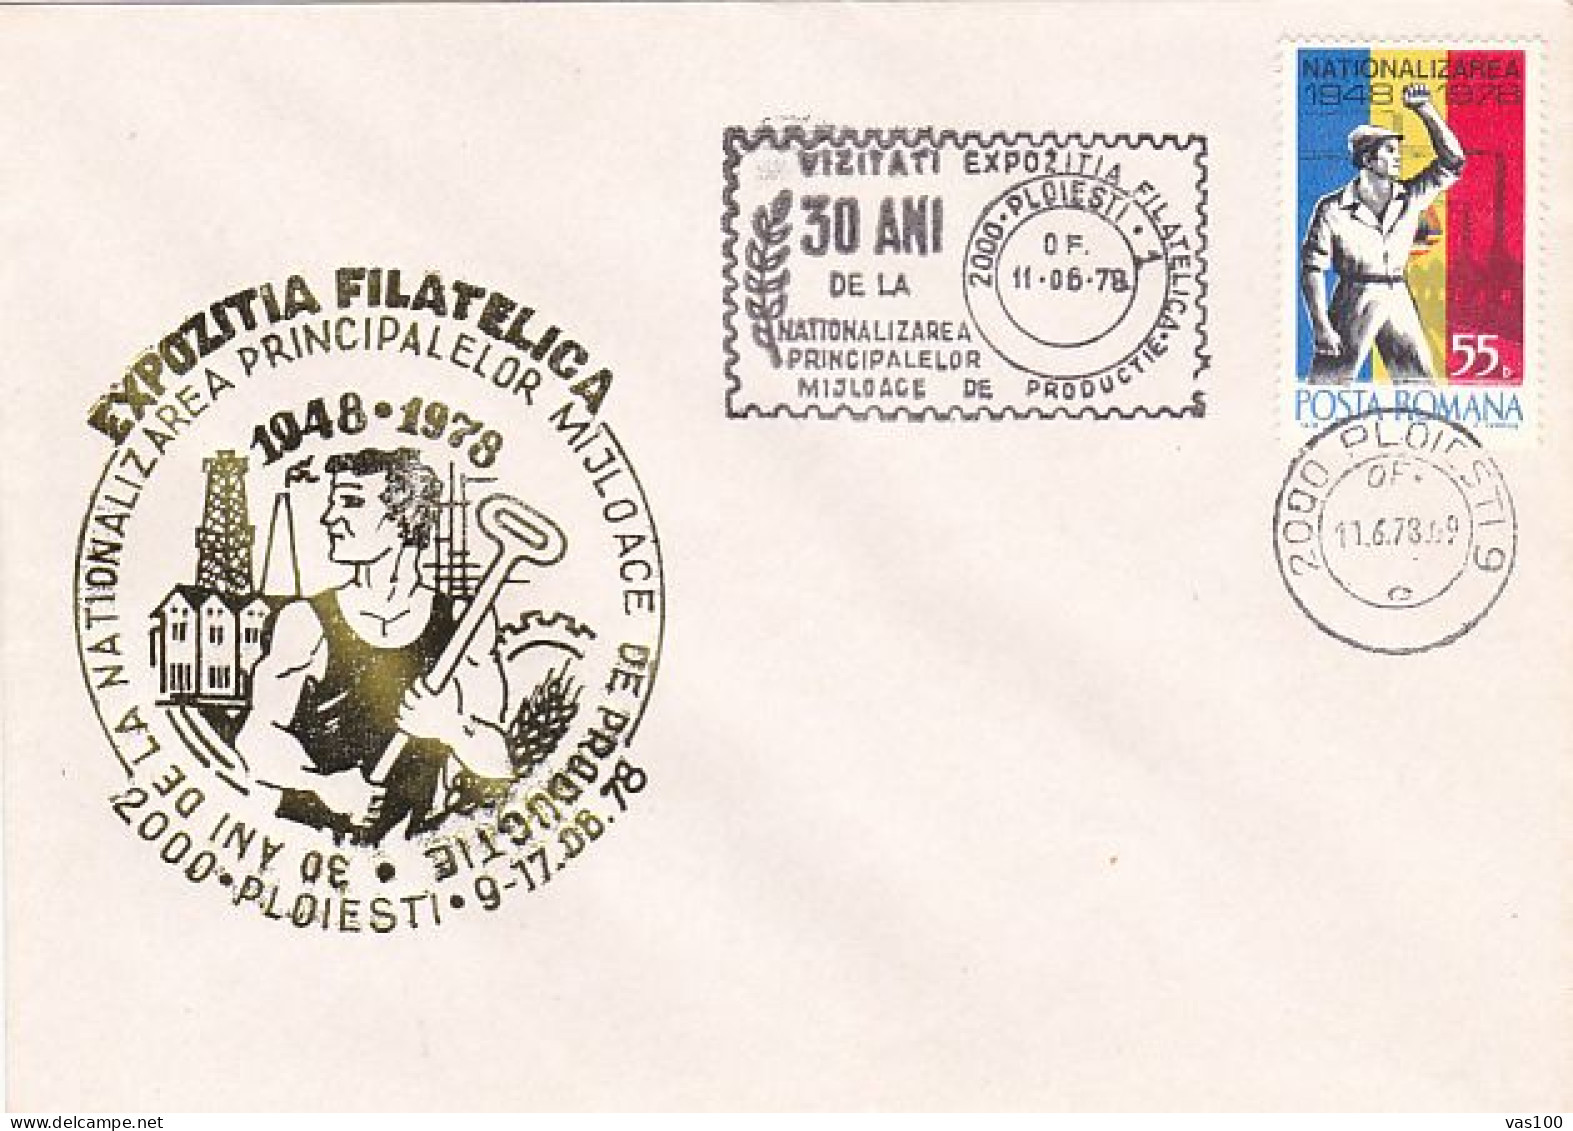 MAIN PRODUCTION MEANS NATIONALIZATION, WELDER, SPECIAL COVER, 1978, ROMANIA - Storia Postale